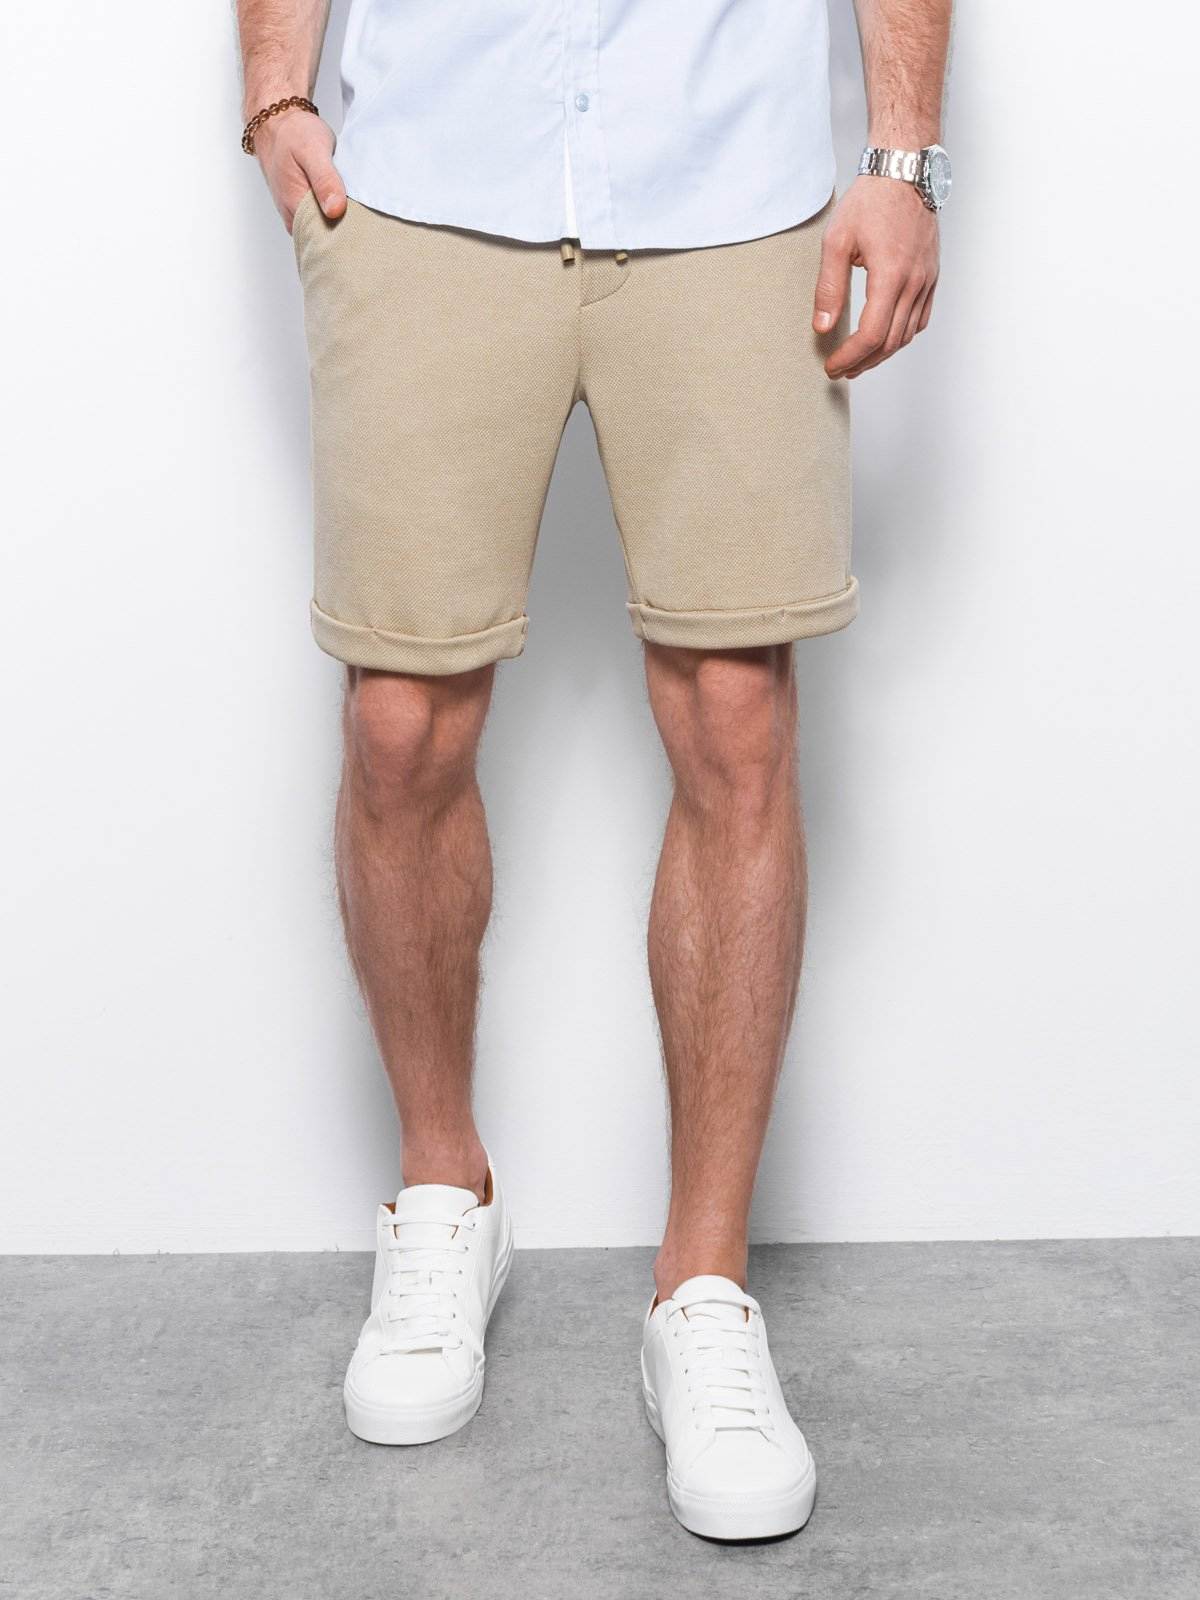 Ombre Men's knit shorts with elastic